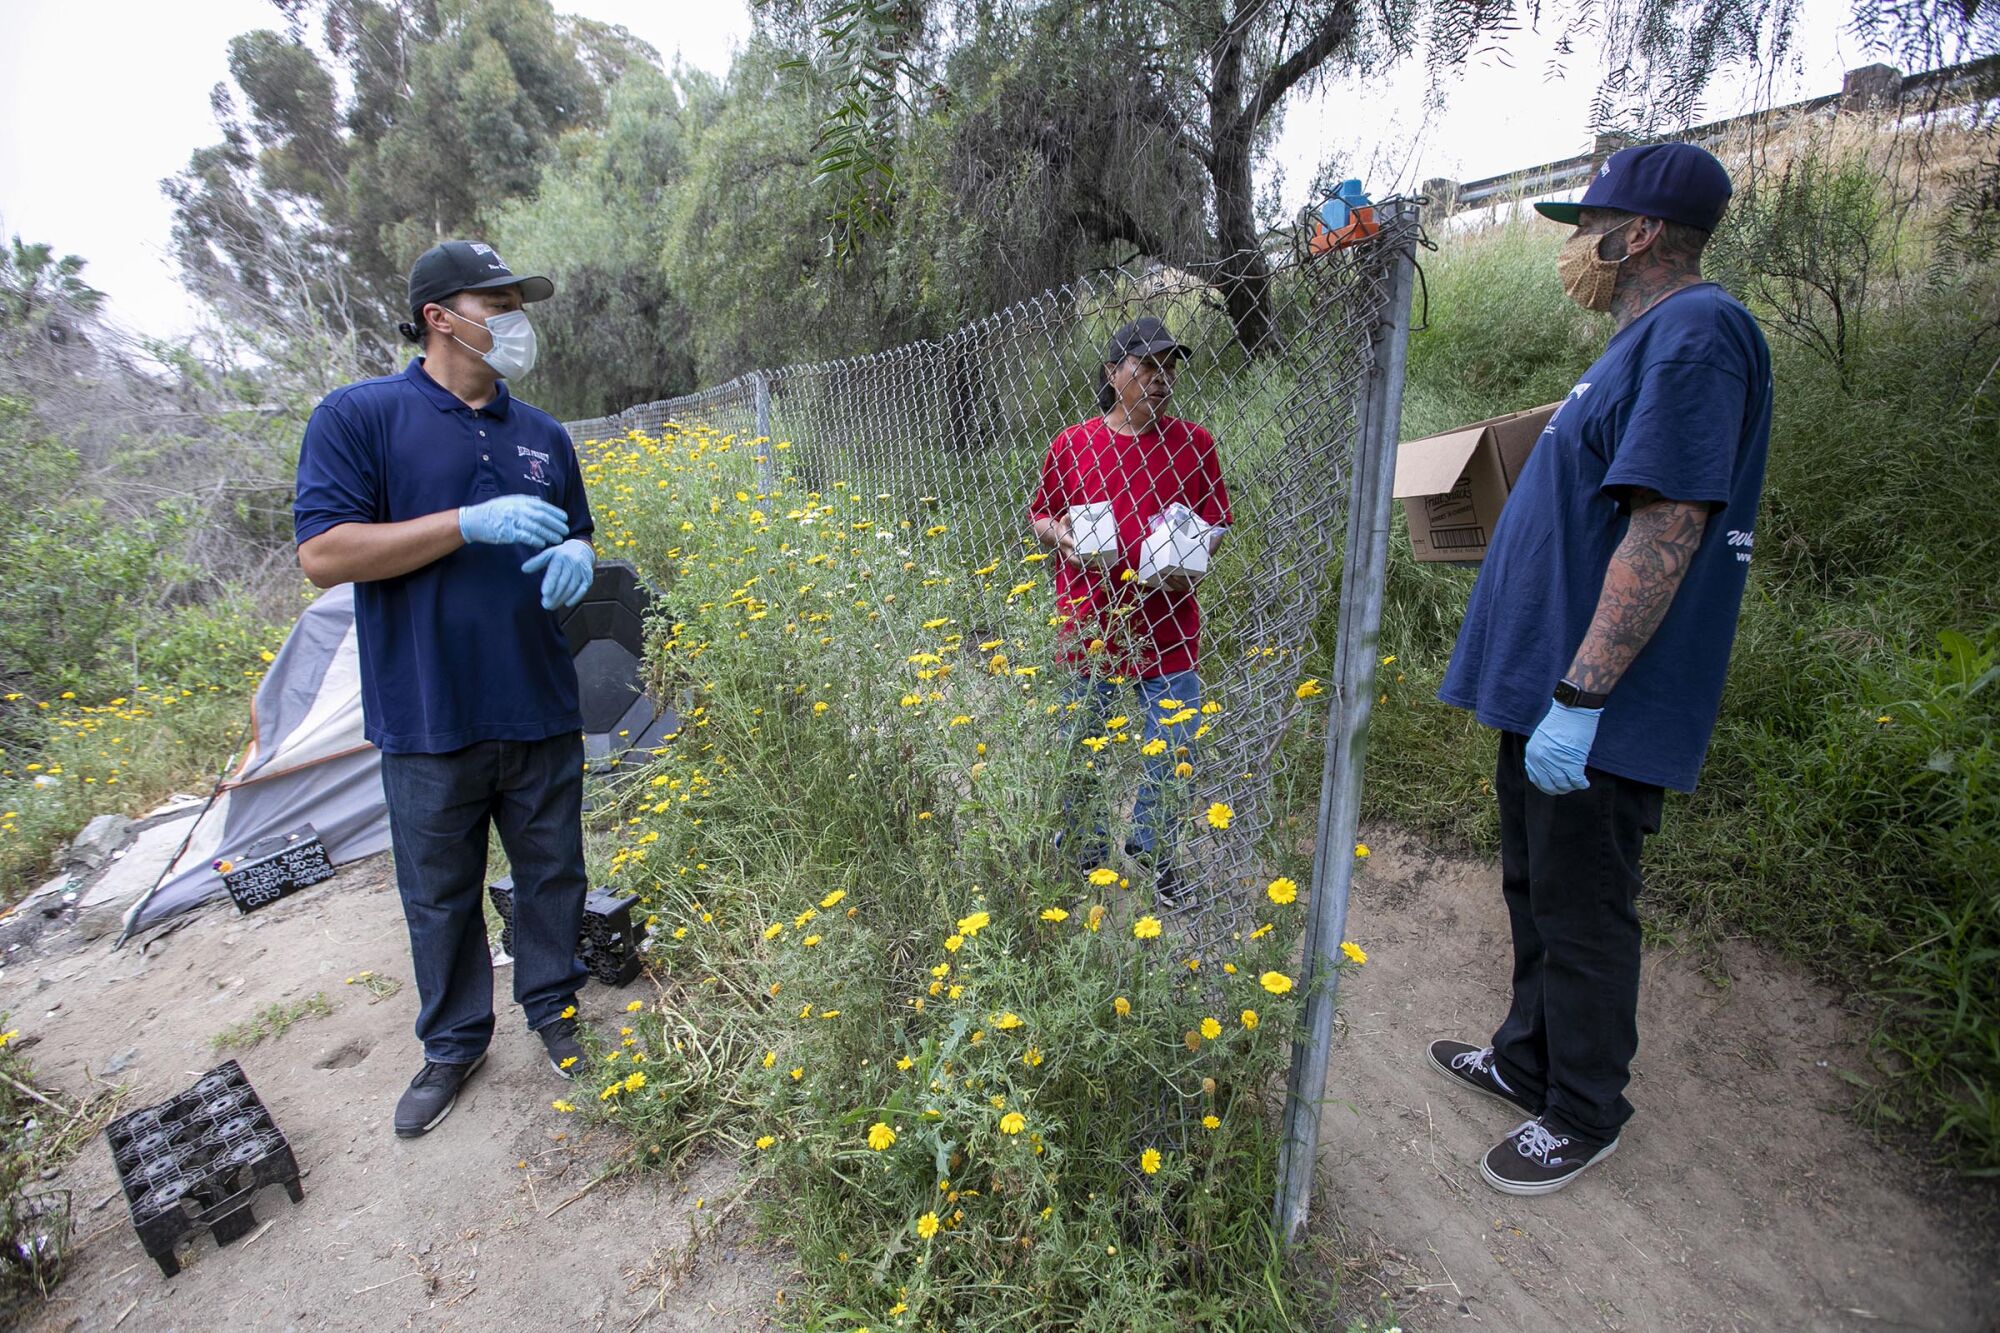 Alpha Project outreach workers, Anthony Aquiningoc, left, and Nick Healy, right, speak with 59 year-old Remigio "Toto" Julio who has been living in the Sweetwater River bottom by the Plaza Bonita mall in National City for the last seven months on Friday, April 30, 2020. Later in the day they took him to the Convention Center shelter.